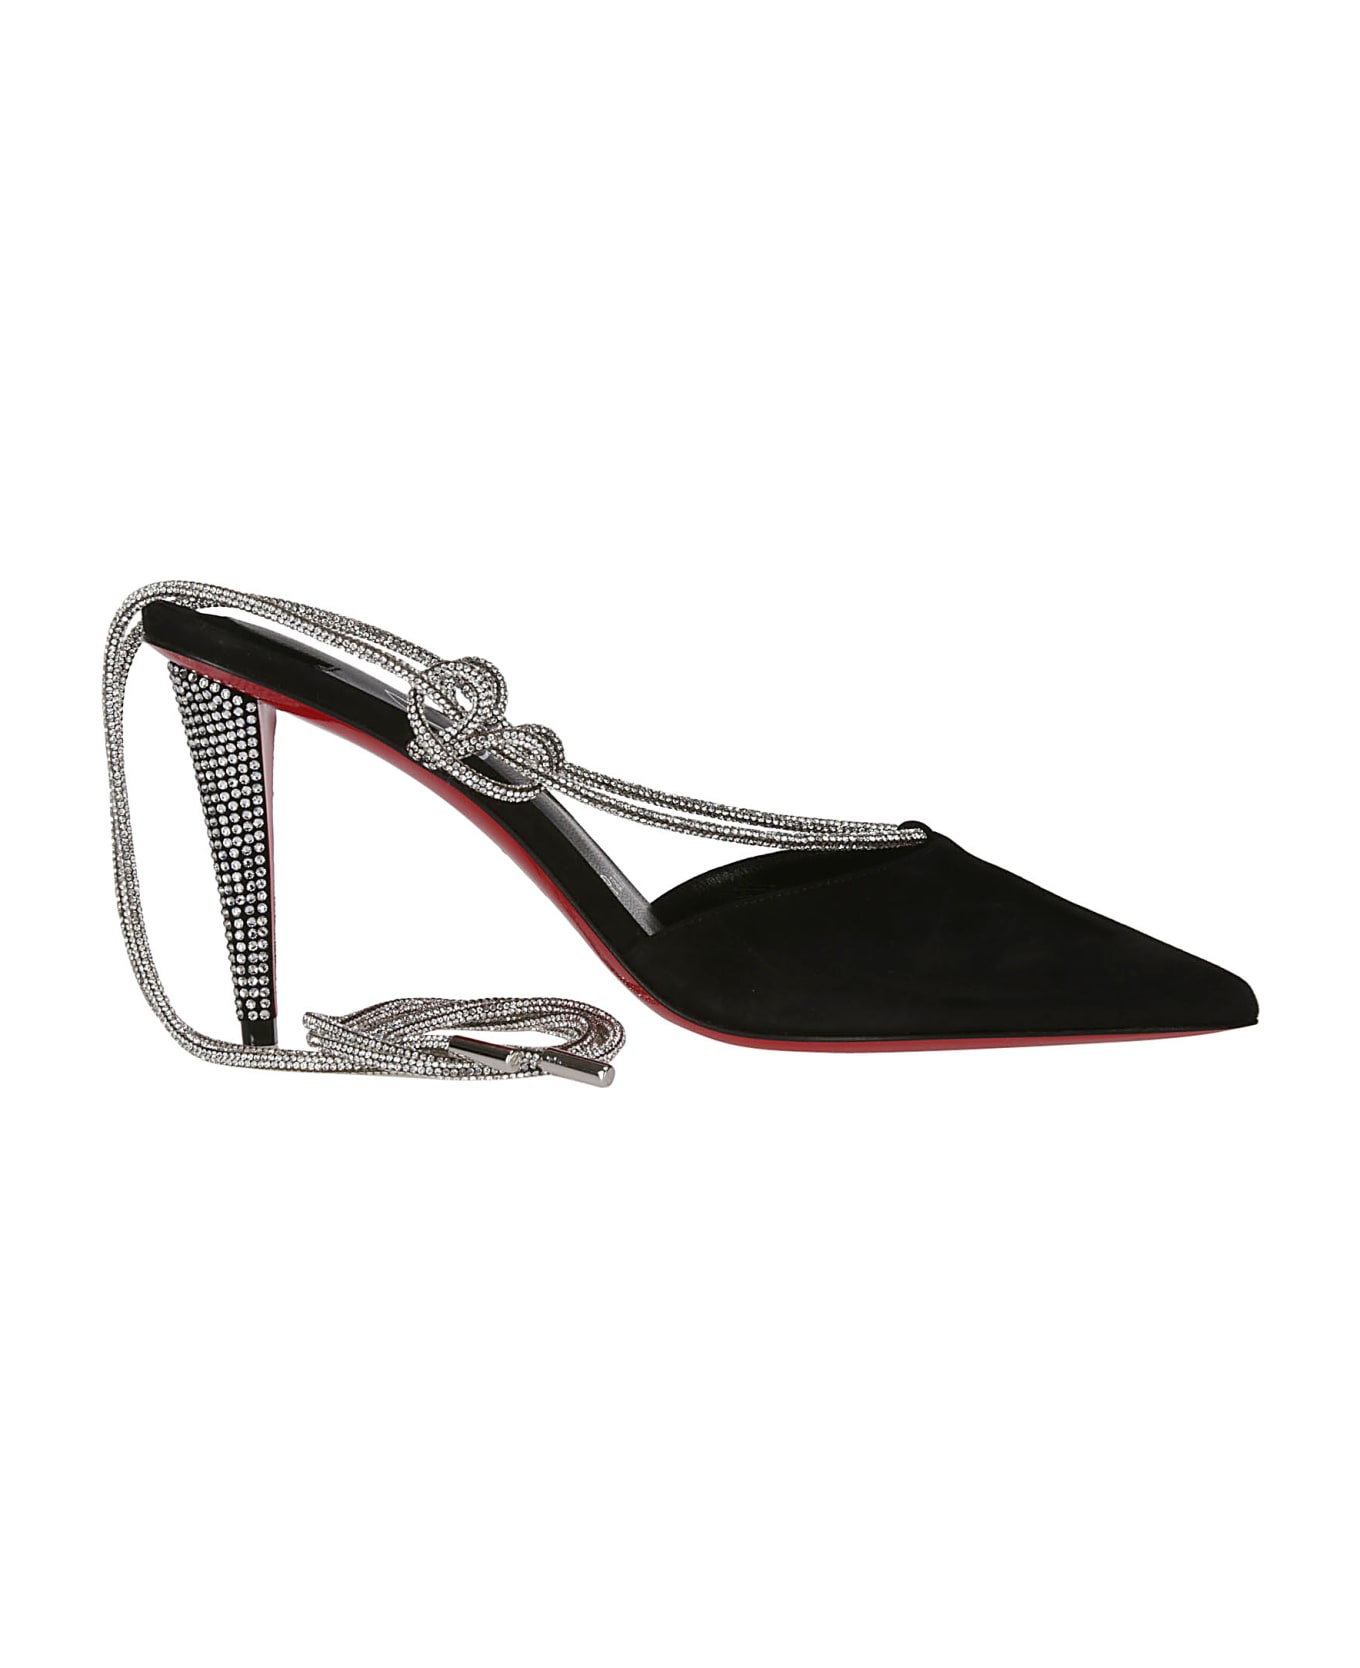 Christian Louboutin Astrid Lace Strass 85 - BLACK/CRY/LIN BLACK